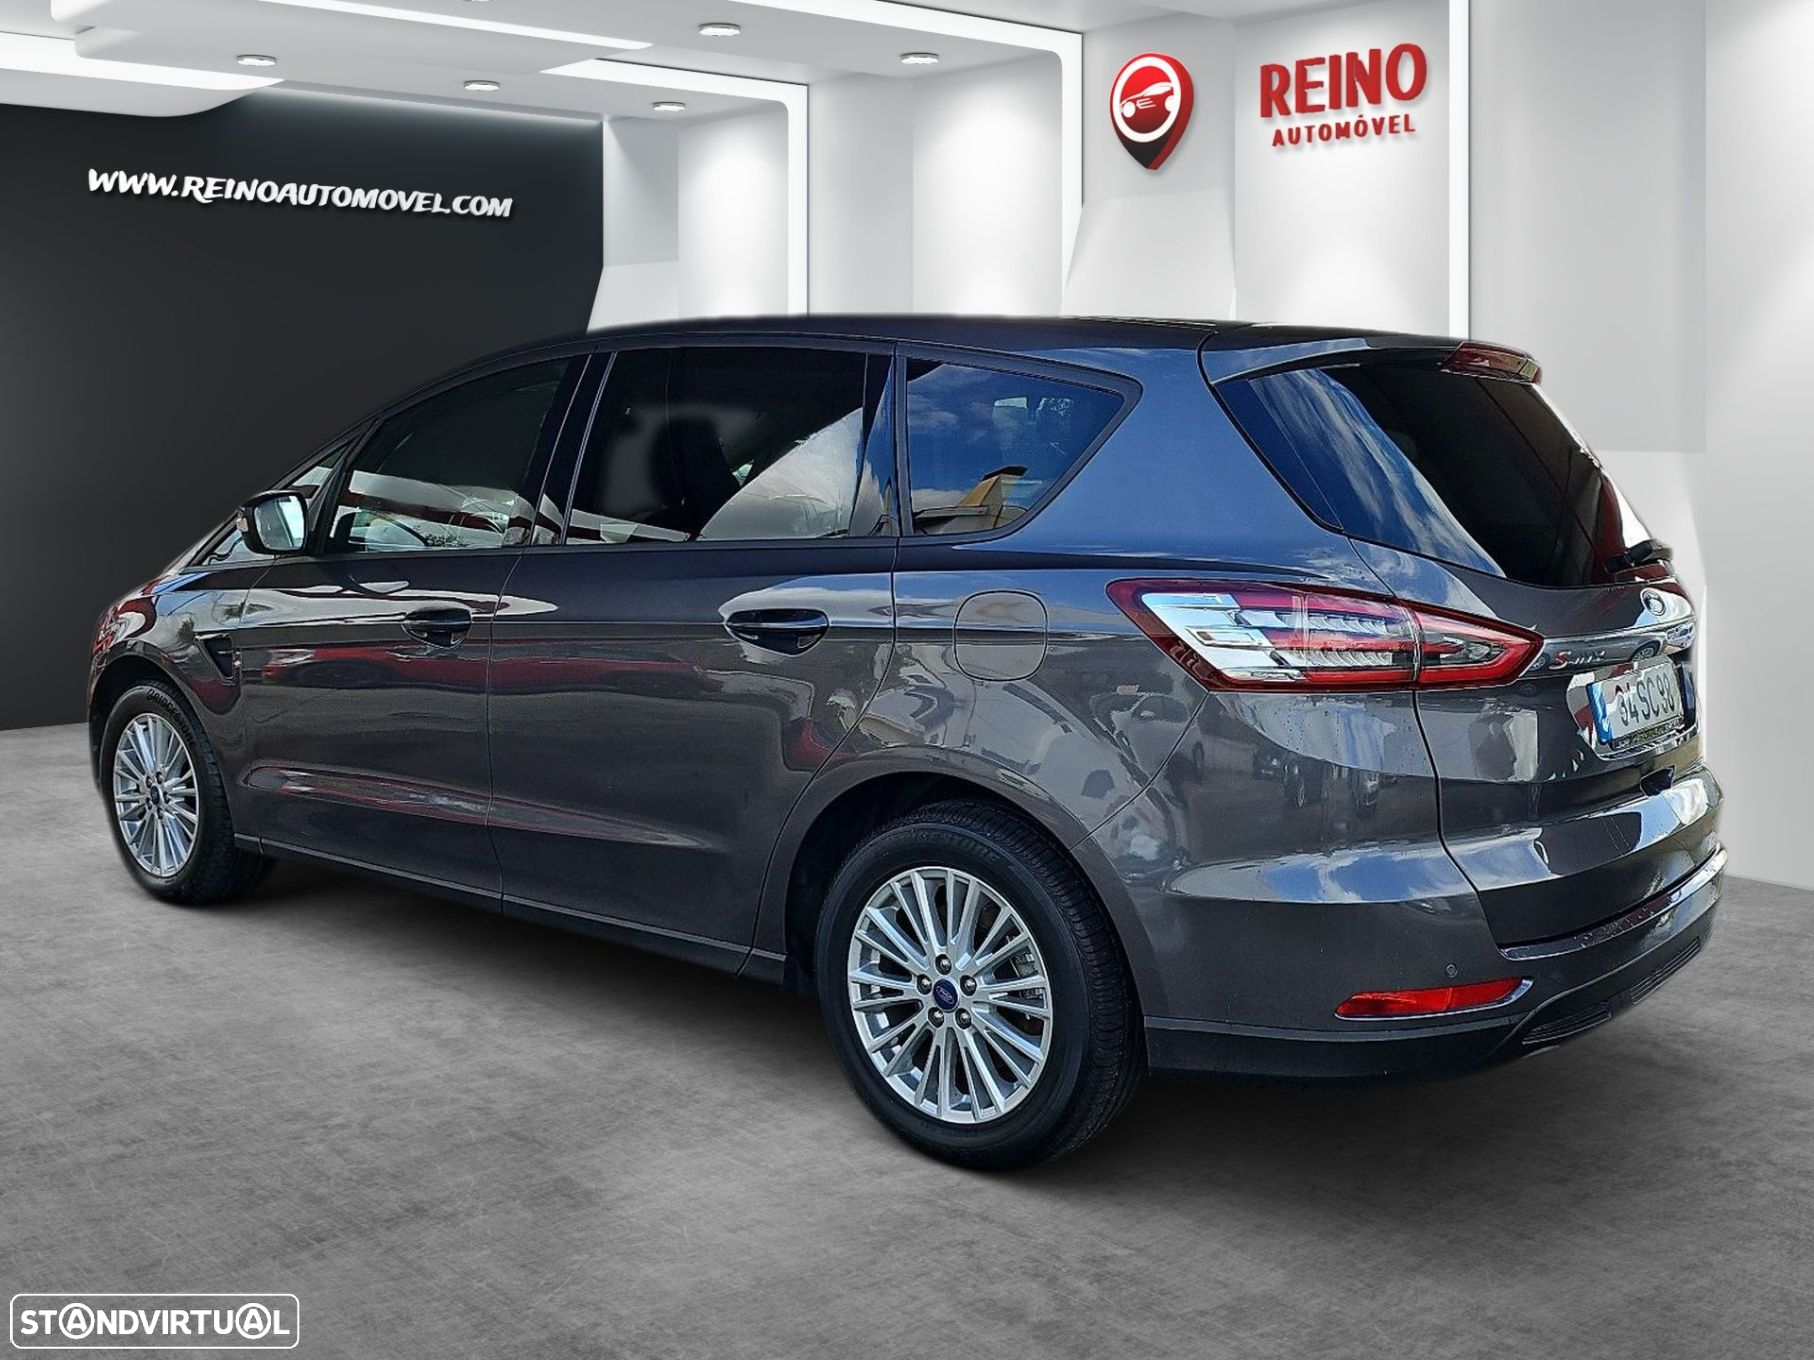 Ford S-Max 2.0 TDCi Trend - 11